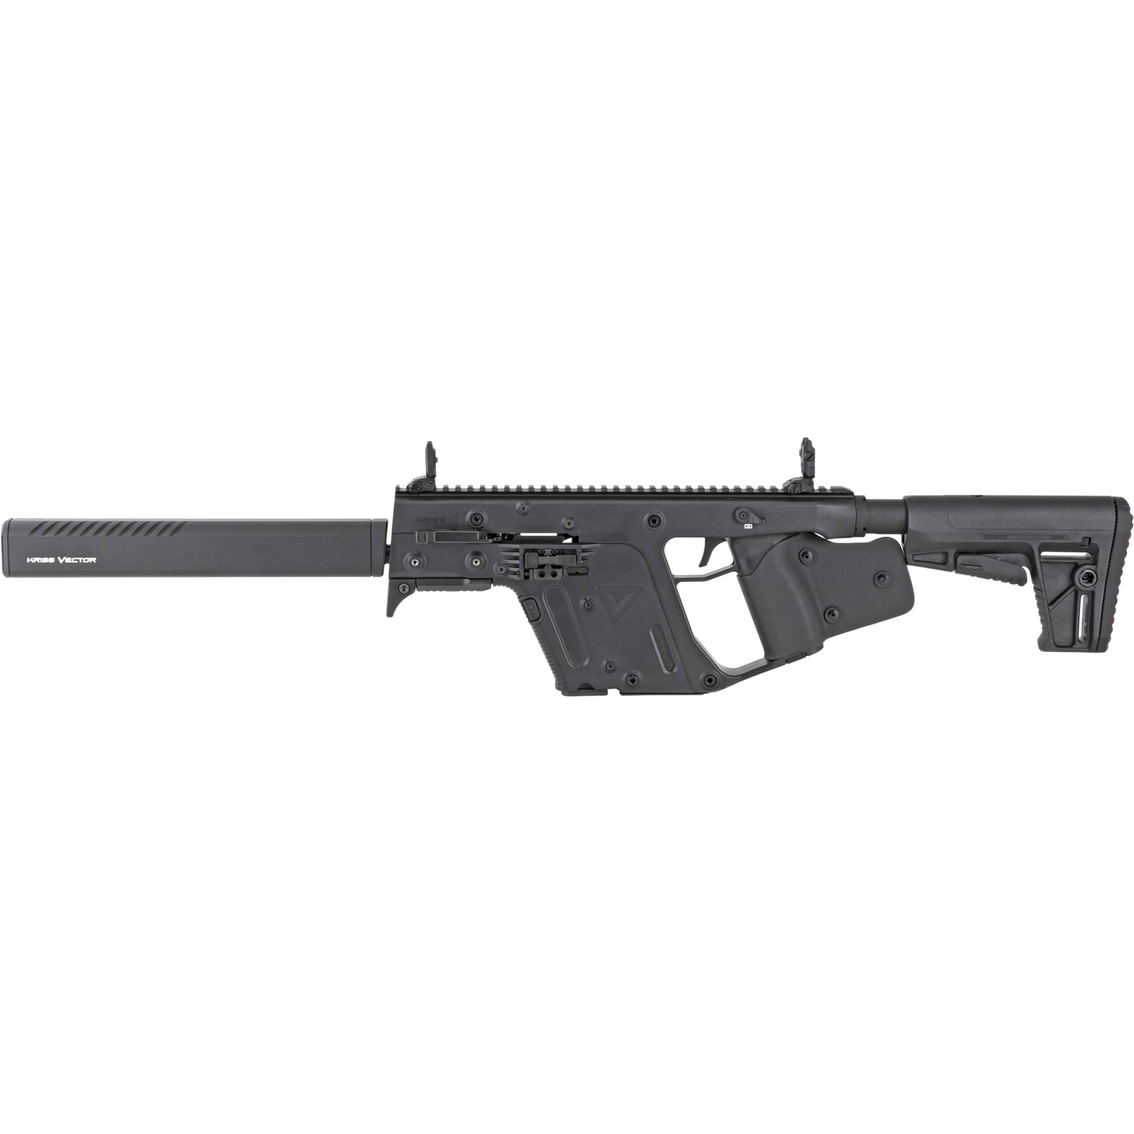 KRISS USA Inc VECTOR CRB Gen II 9MM 16 in. Barrel 10 Rds Rifle Black - Image 2 of 3